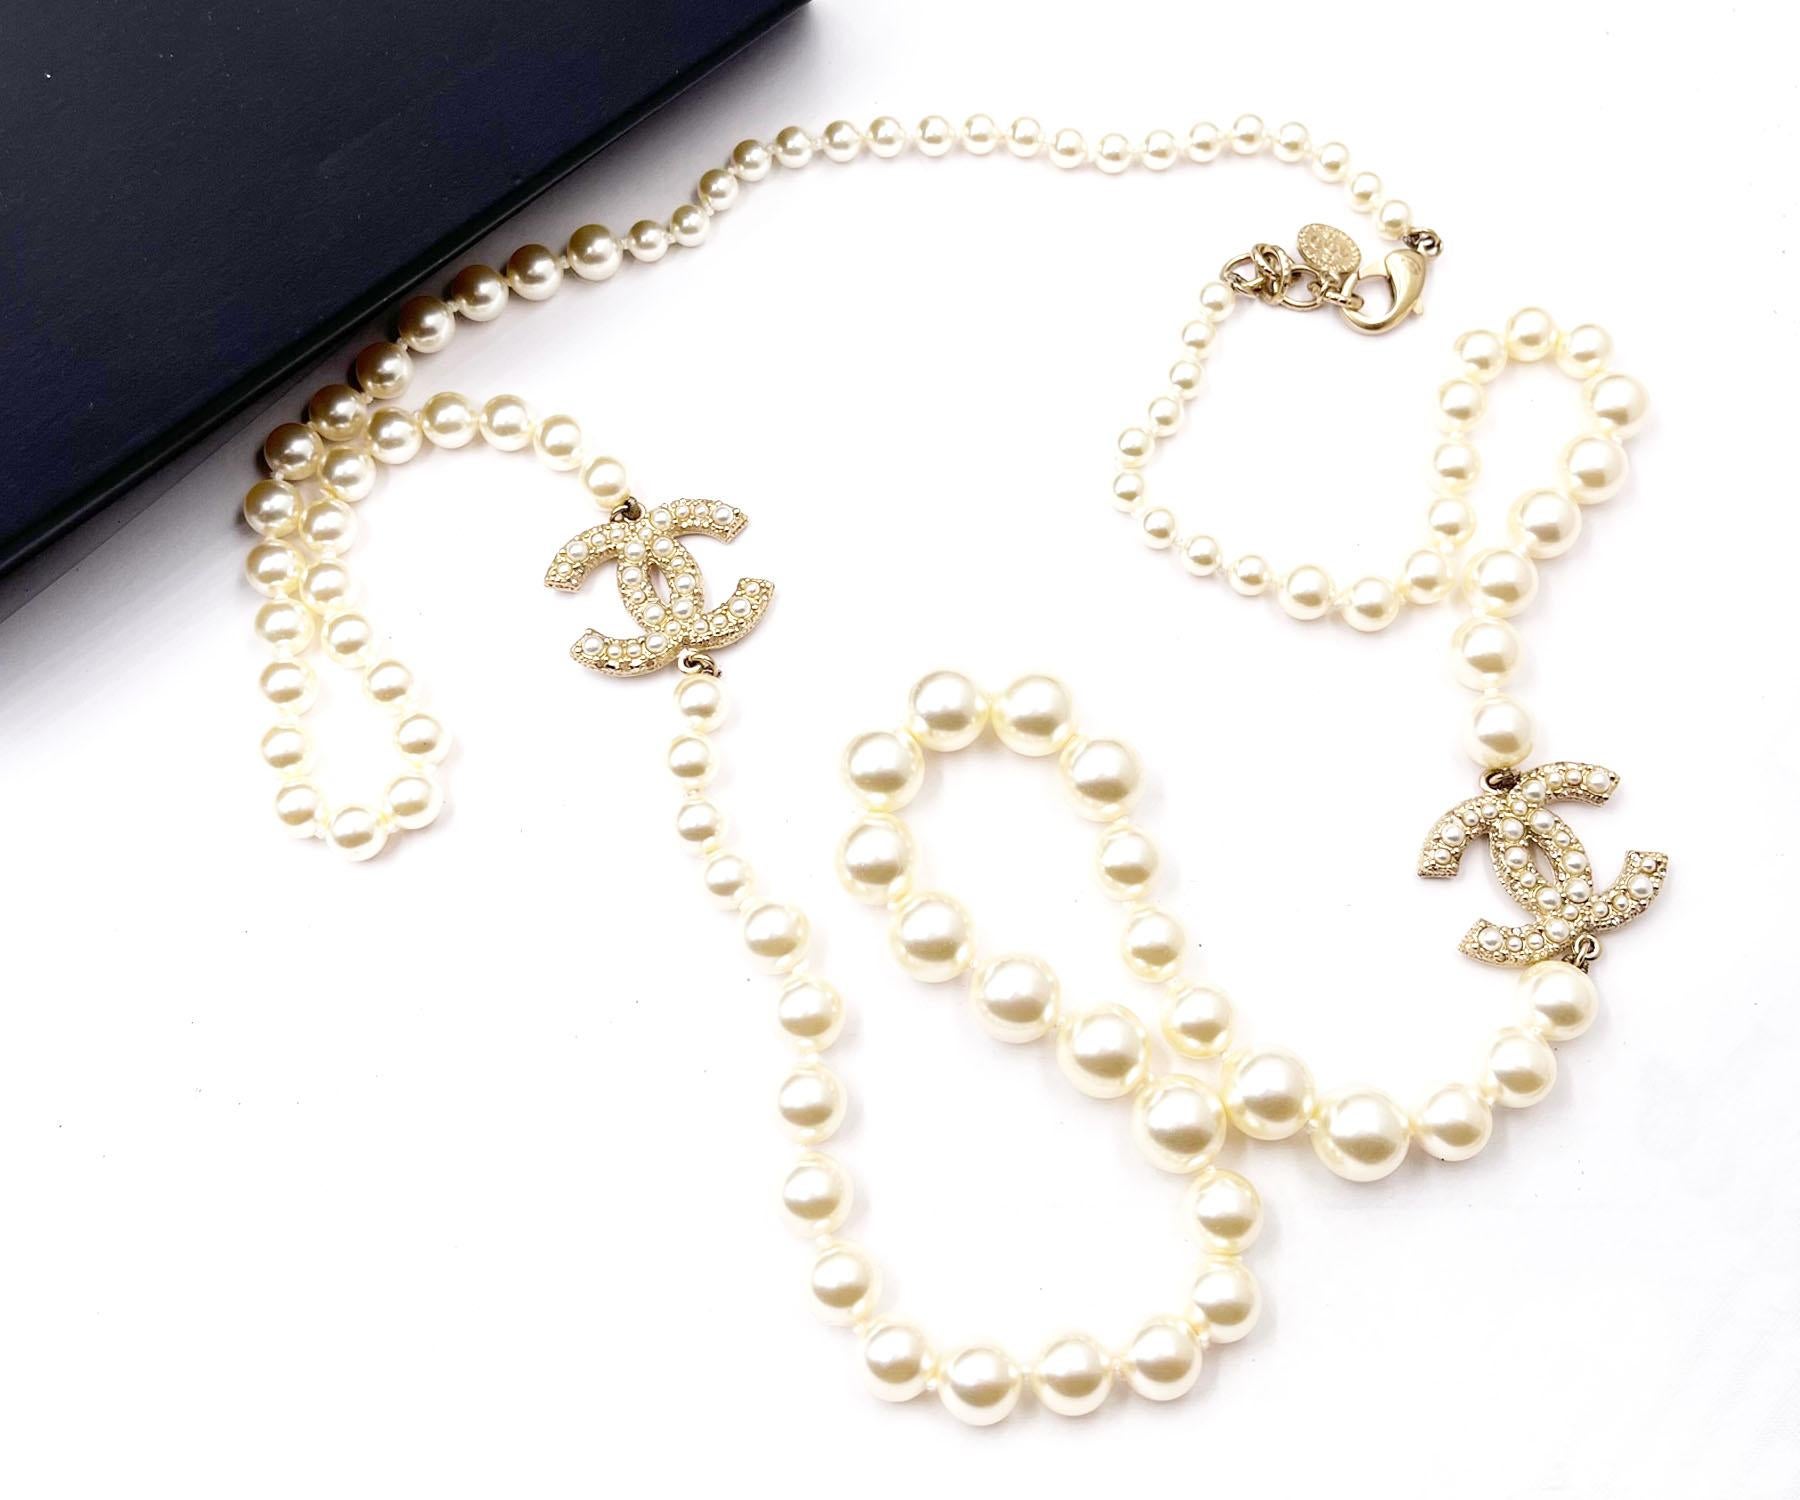 Chanel Gold CC Scatter Pearl Pearl Long Necklace 100 yr Anniversary

*Marked 17
*Made in France
*Comes with the original box

-It is approximately 40